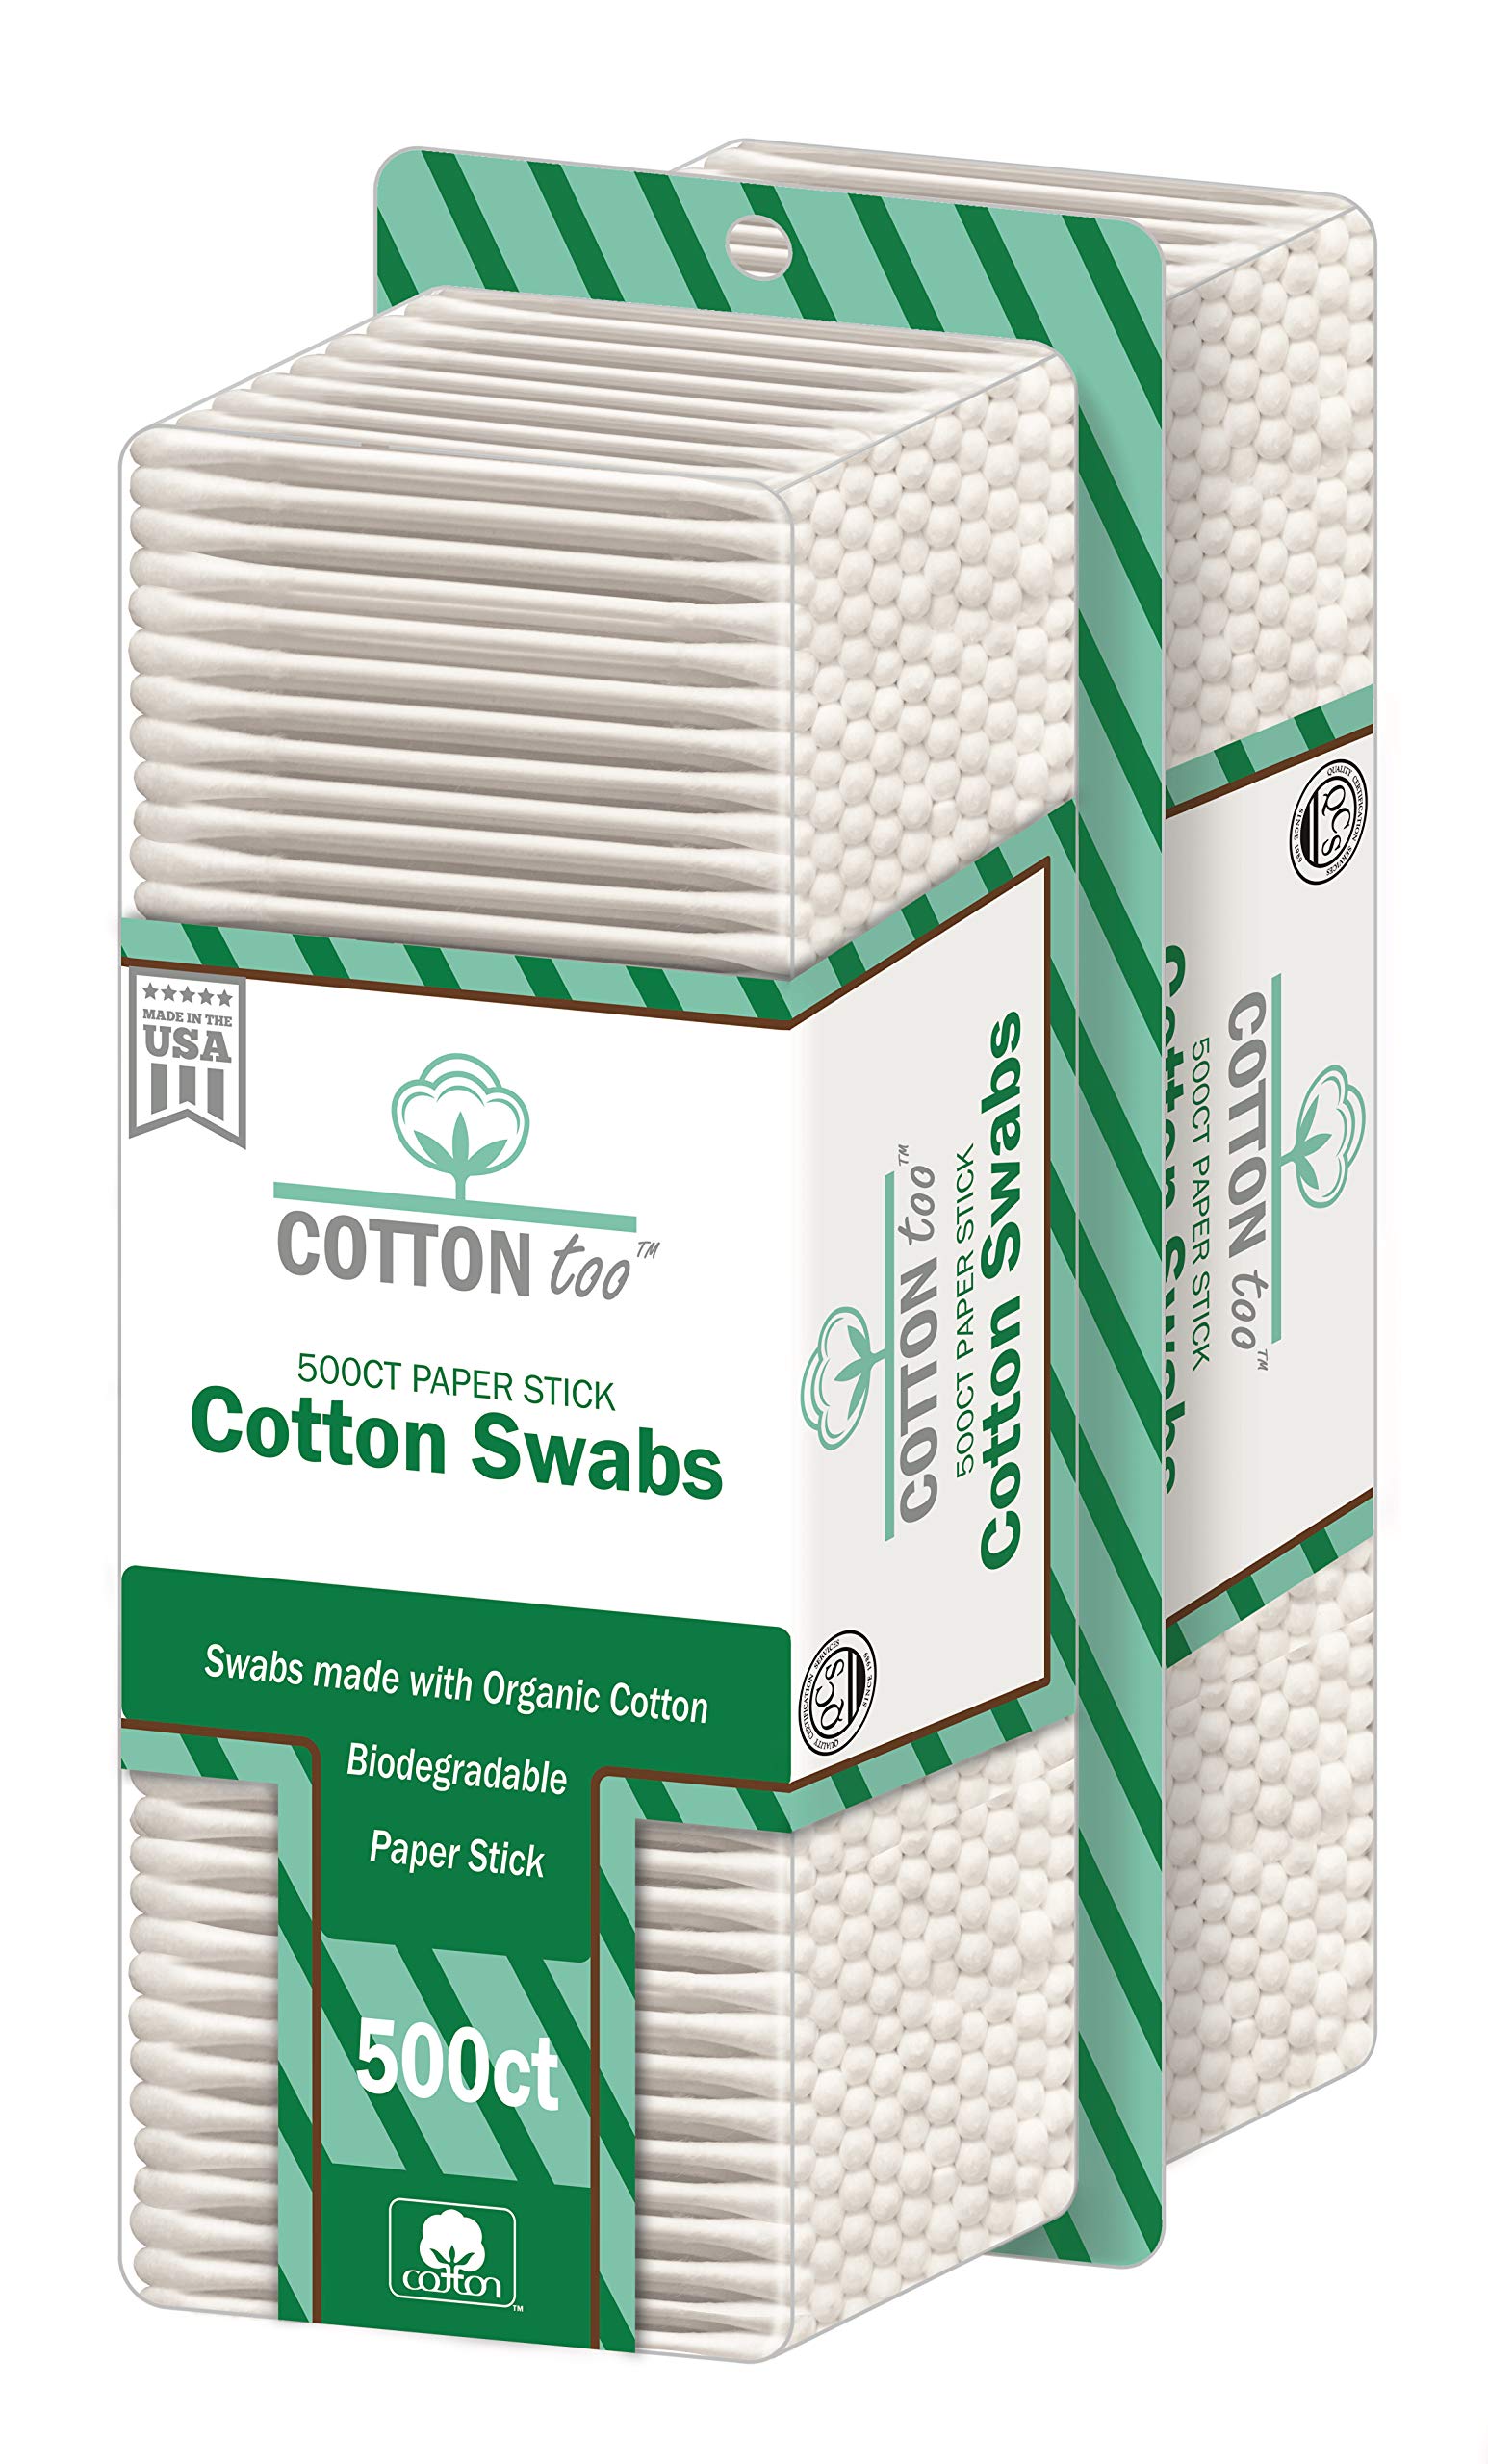 Cotton Too 500 Count Organic Cotton Swabs, 2 Pack